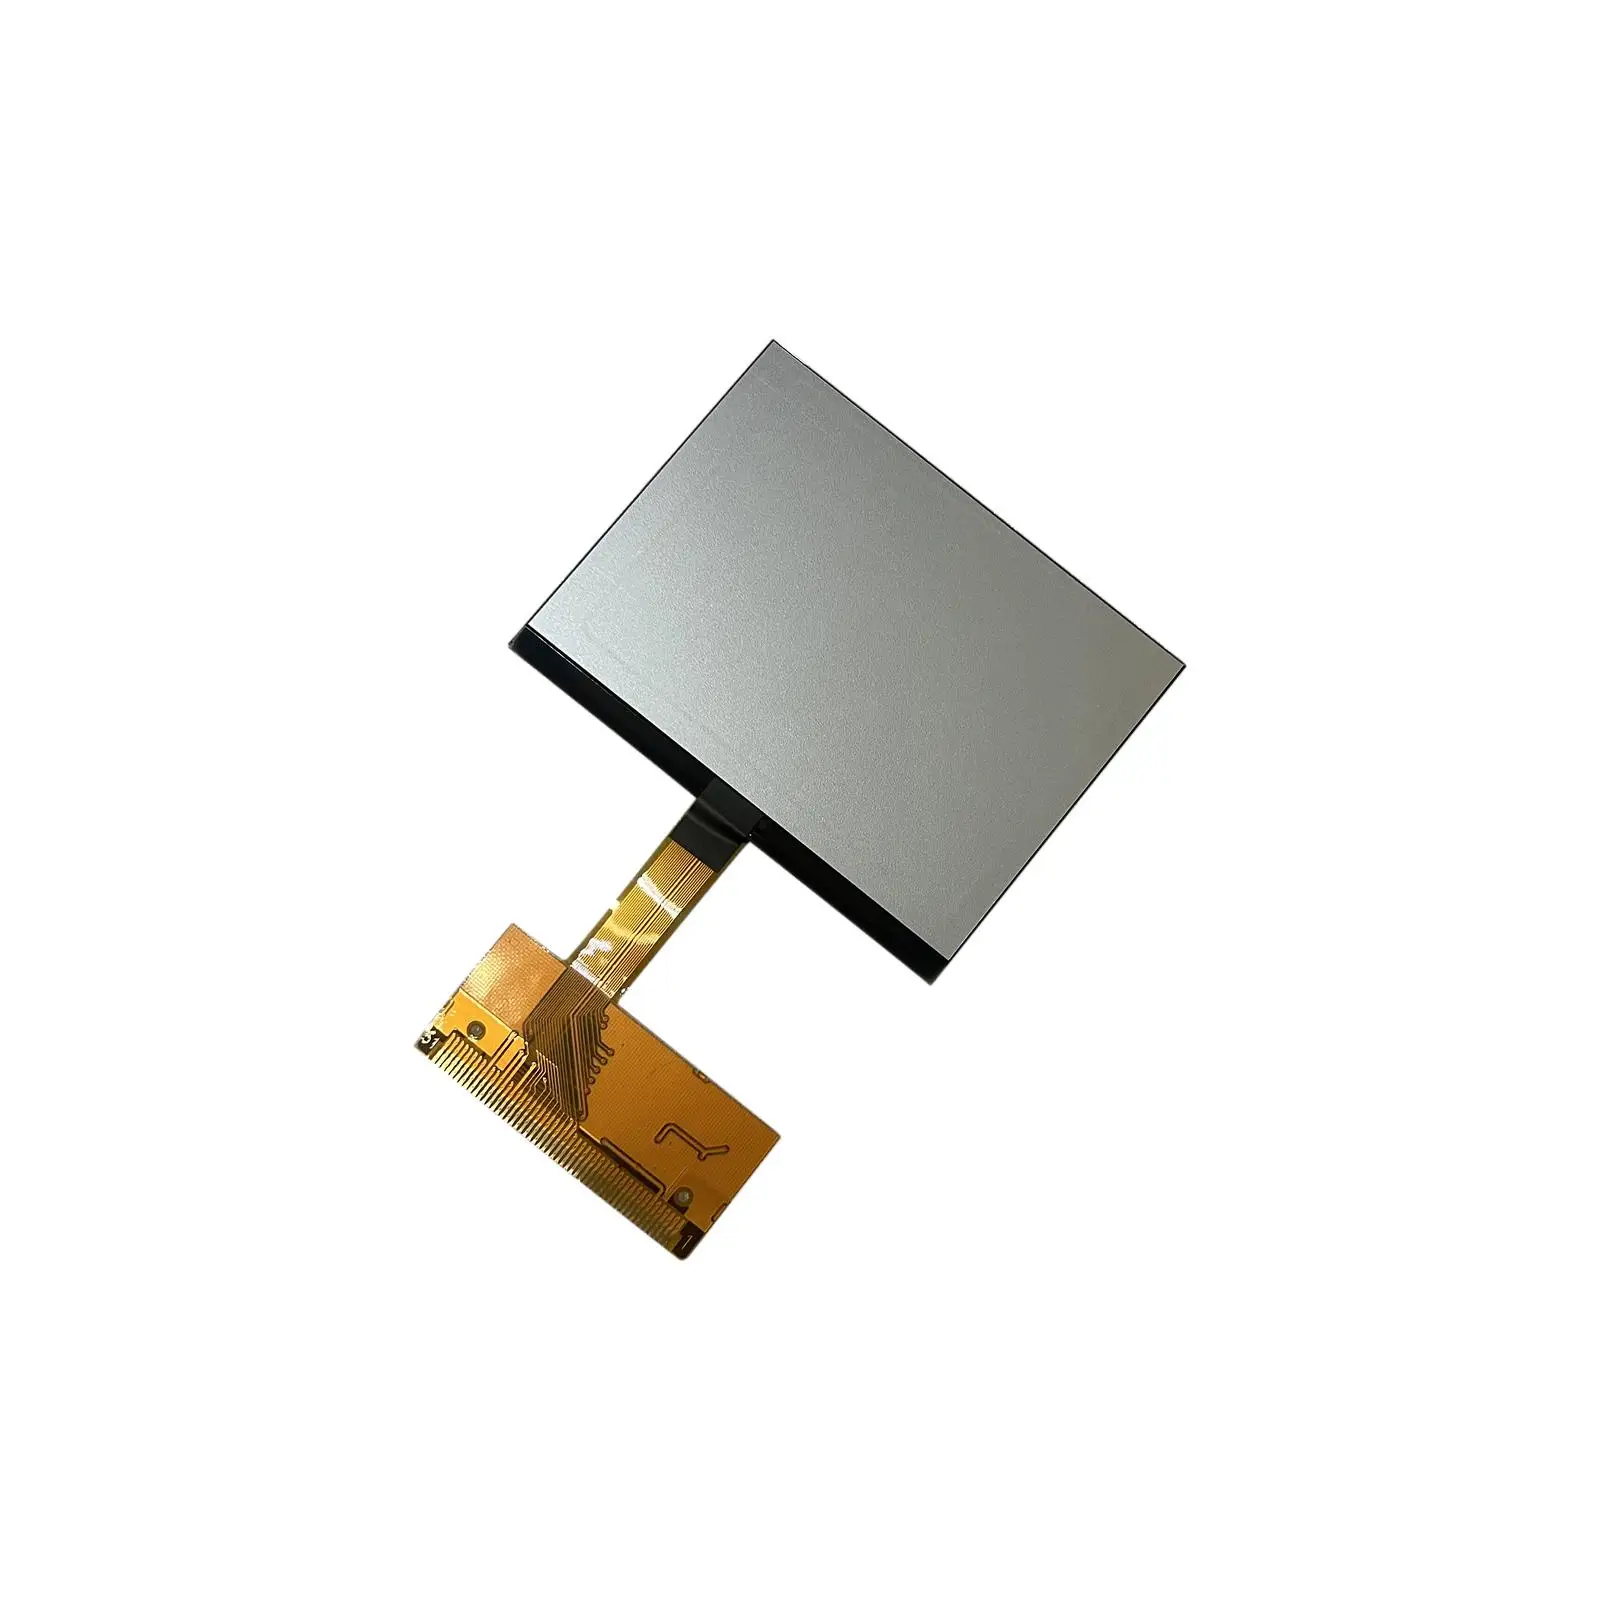 LCD Display Replacement Automobile Repairing Accessory for Audi A3 A4